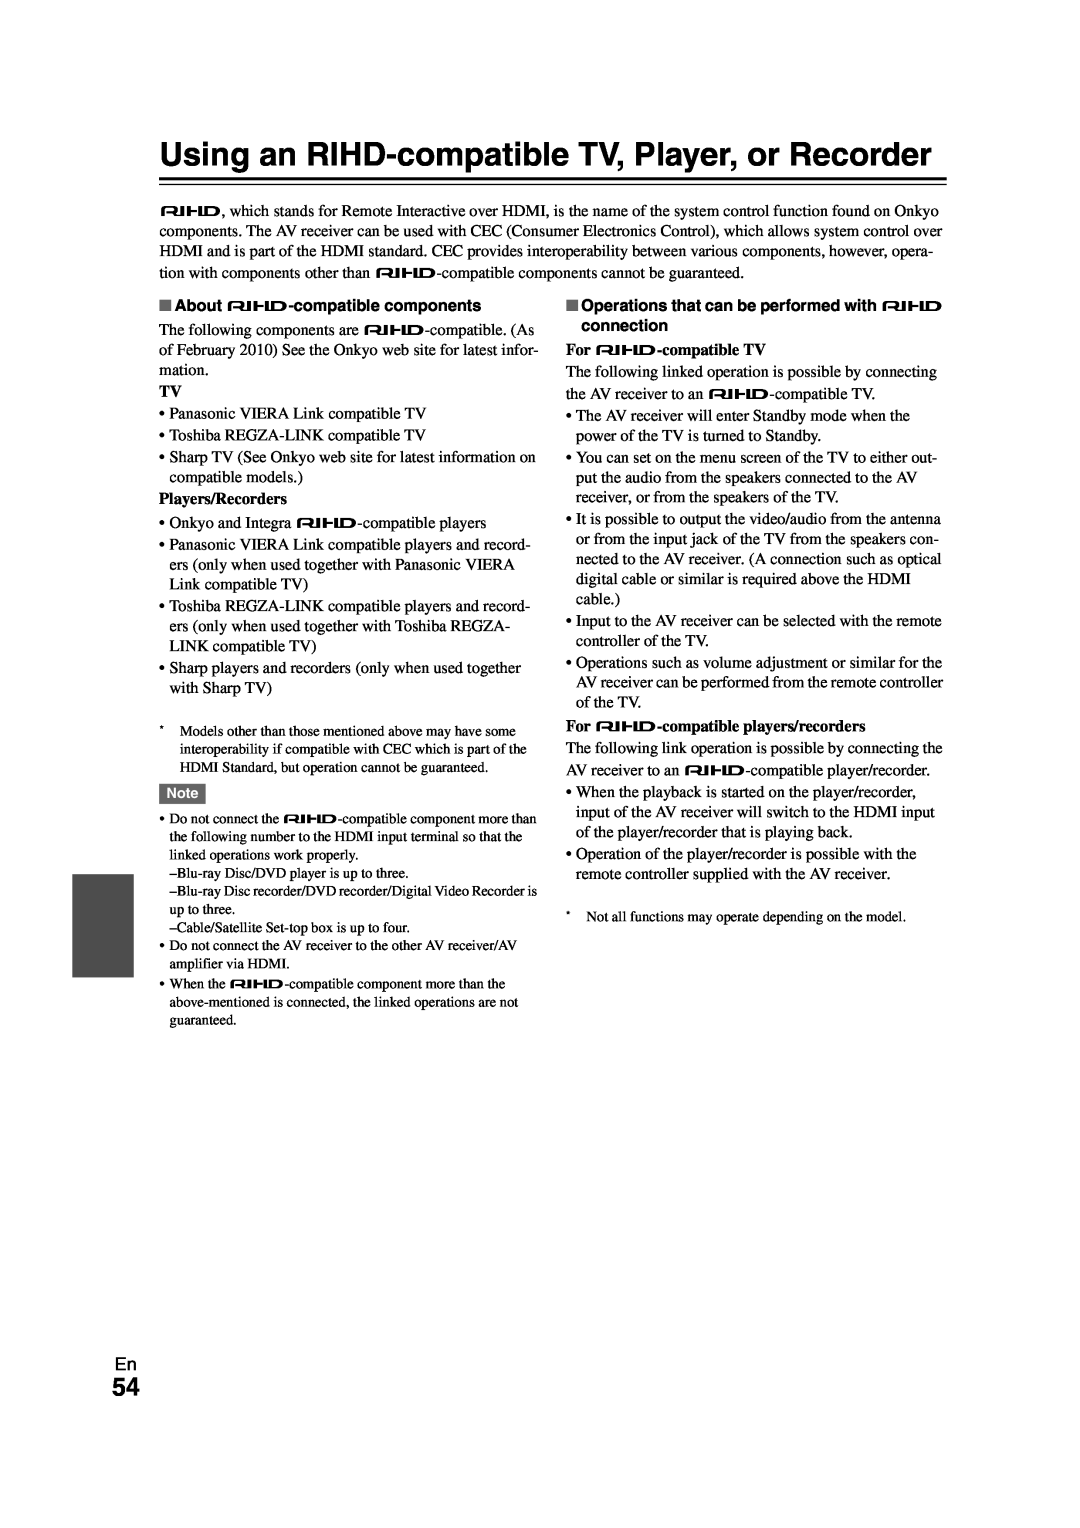 Onkyo HT-S3300 instruction manual Using an RIHD-compatibleTV, Player, or Recorder, About p-compatiblecomponents 